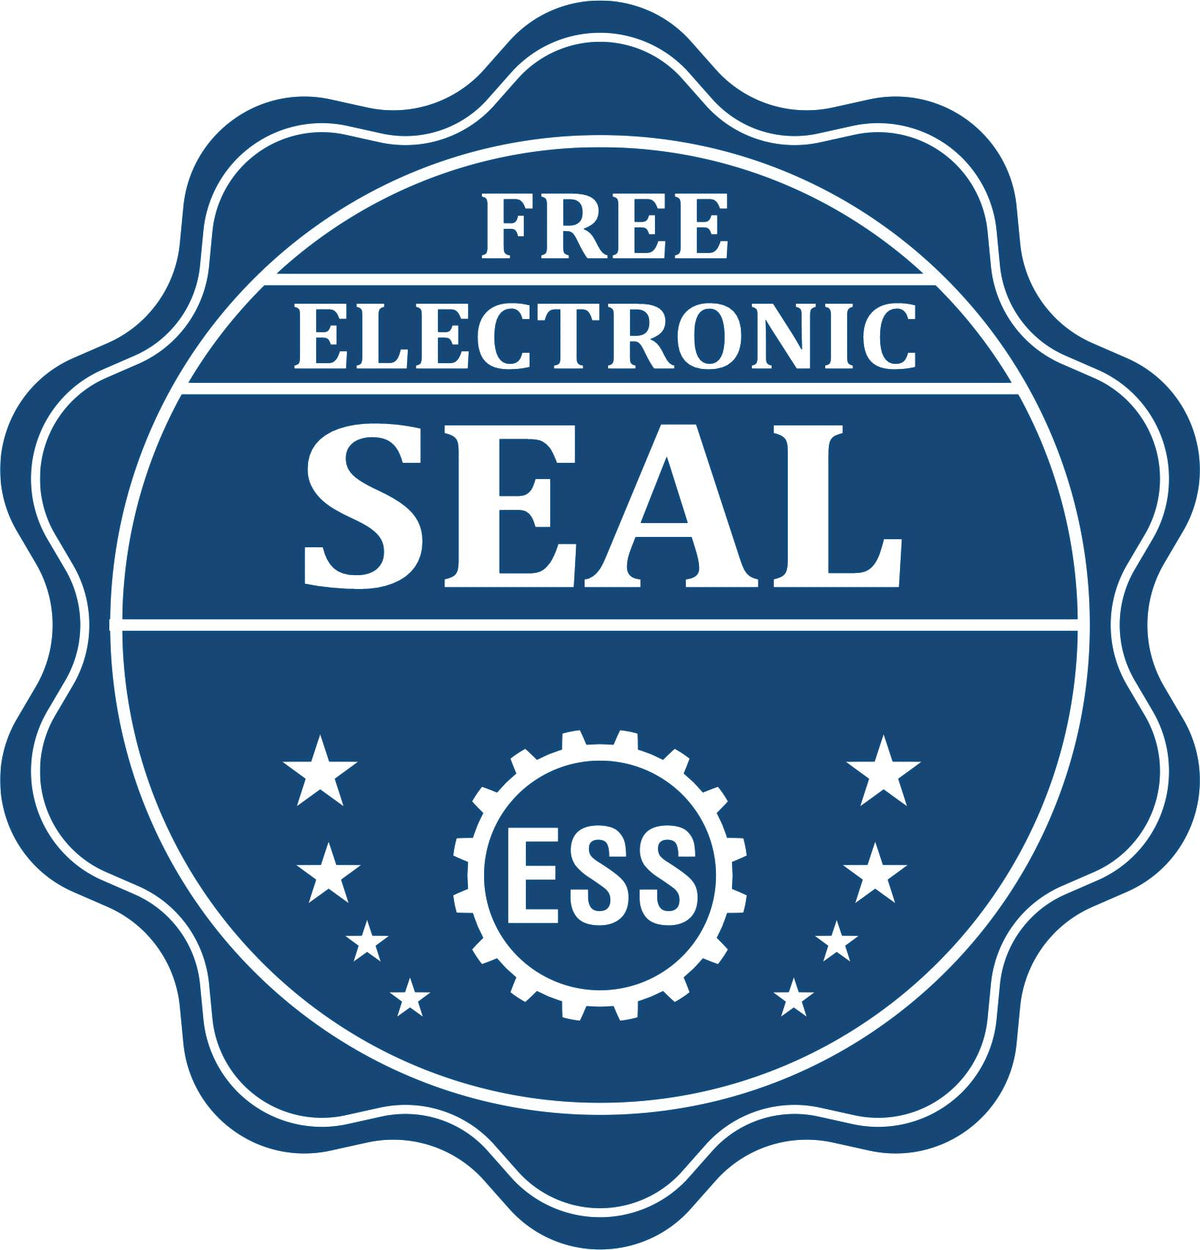 A badge showing a free electronic seal for the Handheld Massachusetts Professional Engineer Embosser with stars and the ESS gear on the emblem.